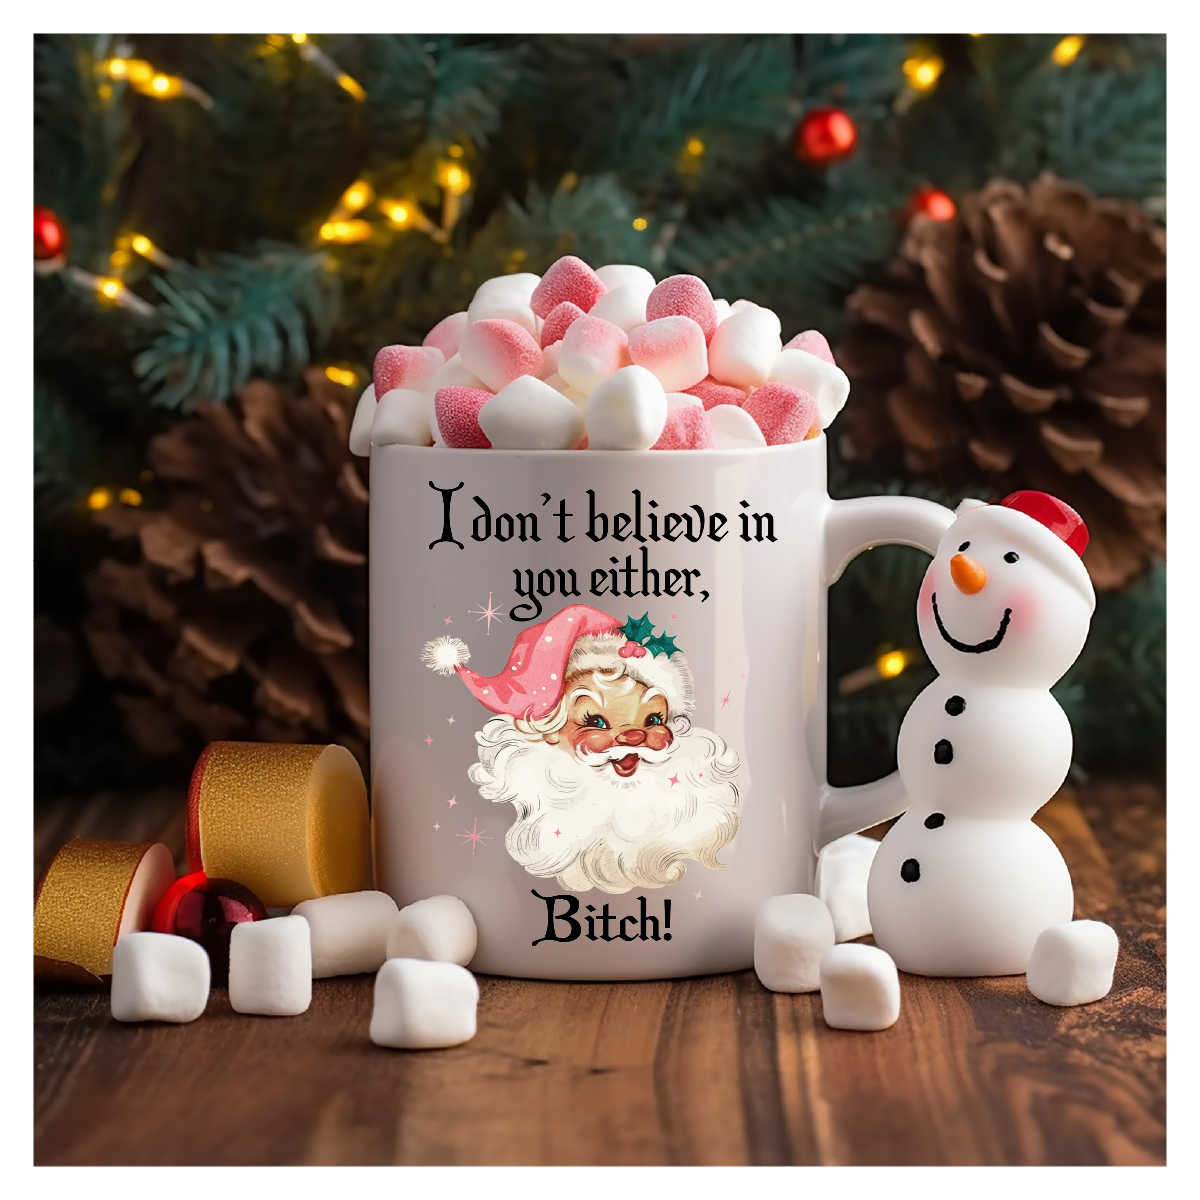 I Dont Believe in You Either Bitch Pink Santa Coffee Mug